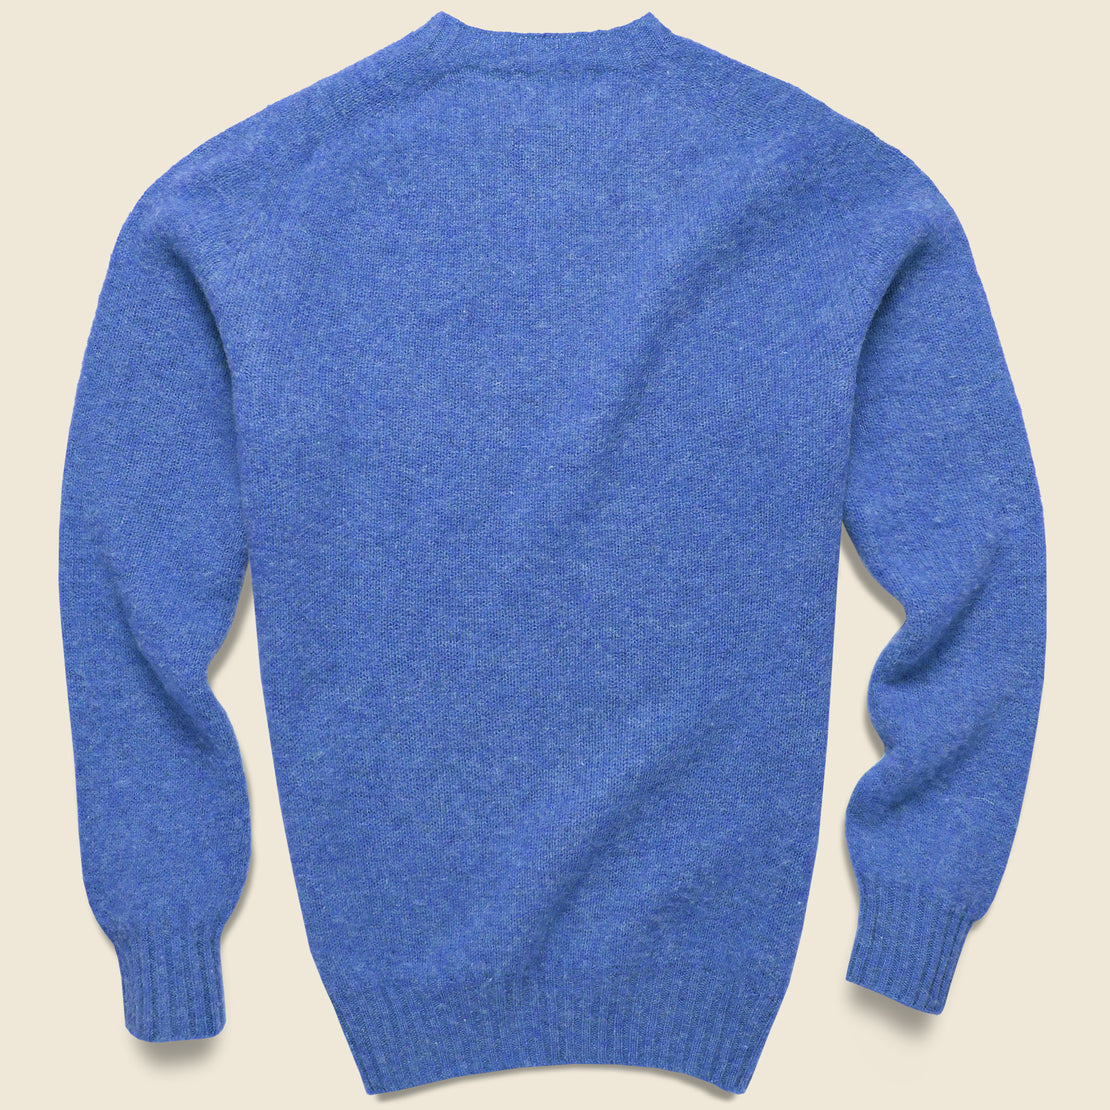 Birth Of The Cool Solid Wool Sweater - Apollo - Howlin - STAG Provisions - Tops - Sweater